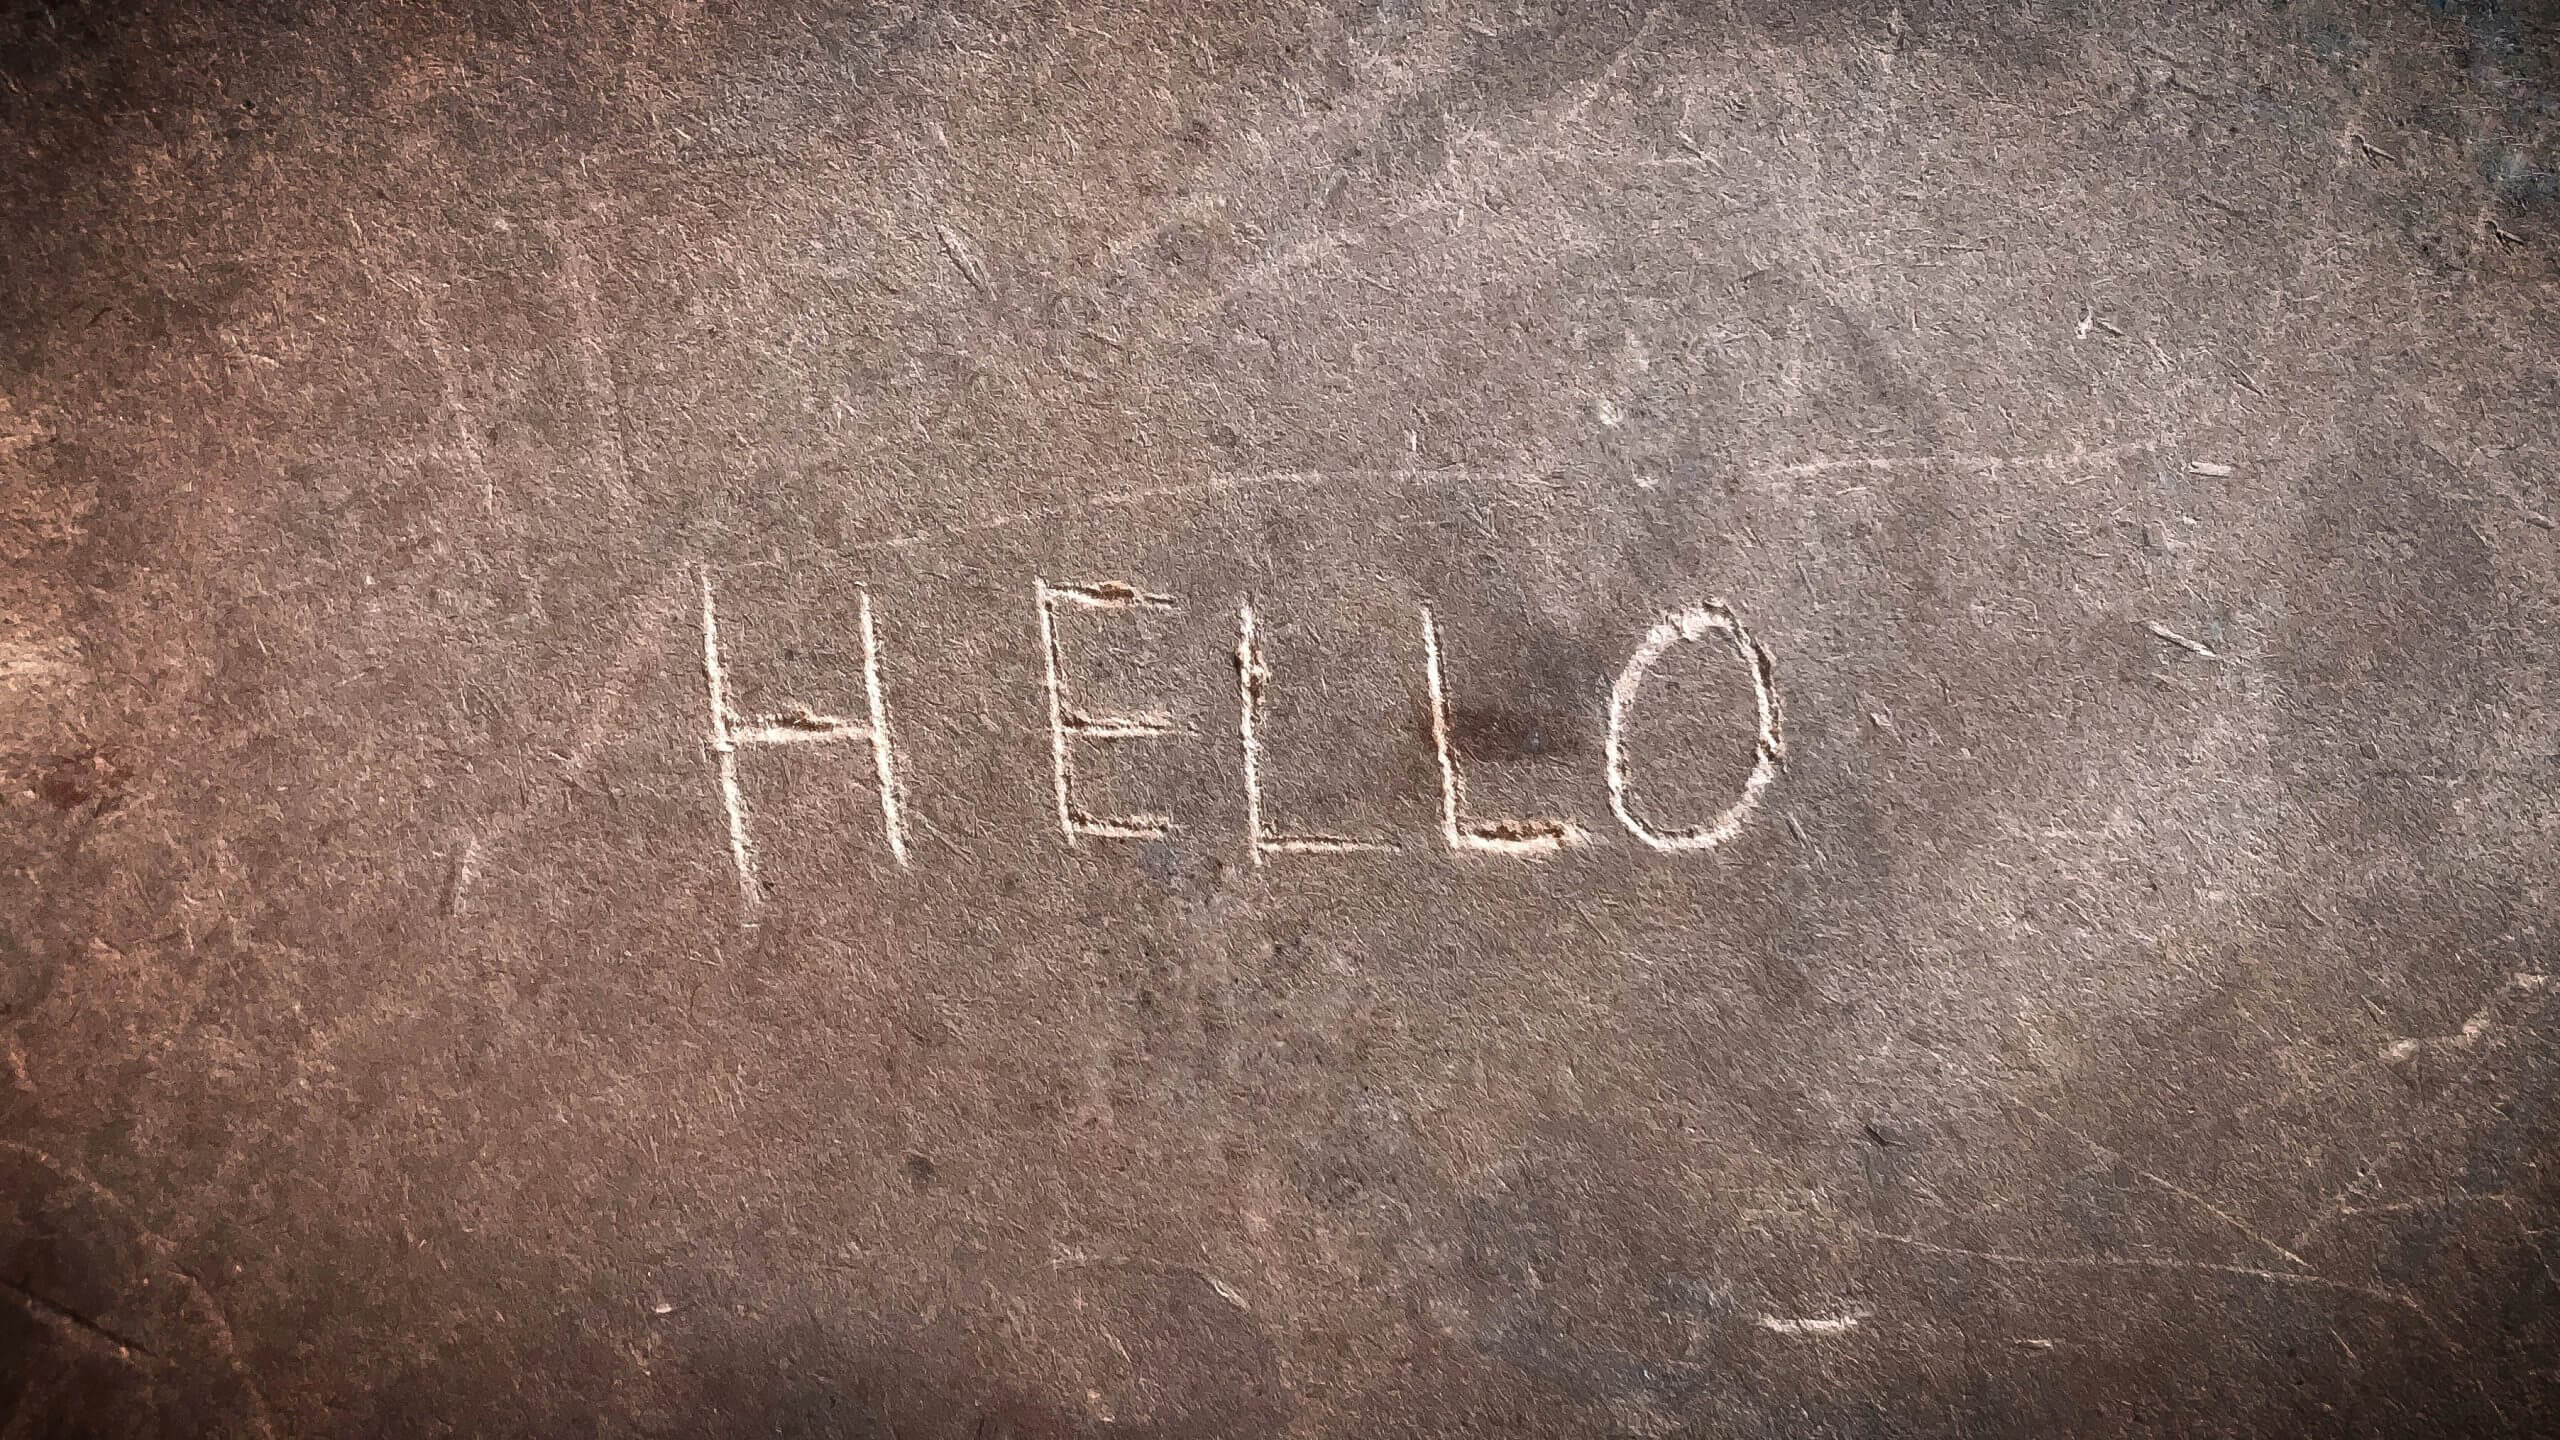 The word "hello" etched into cement.